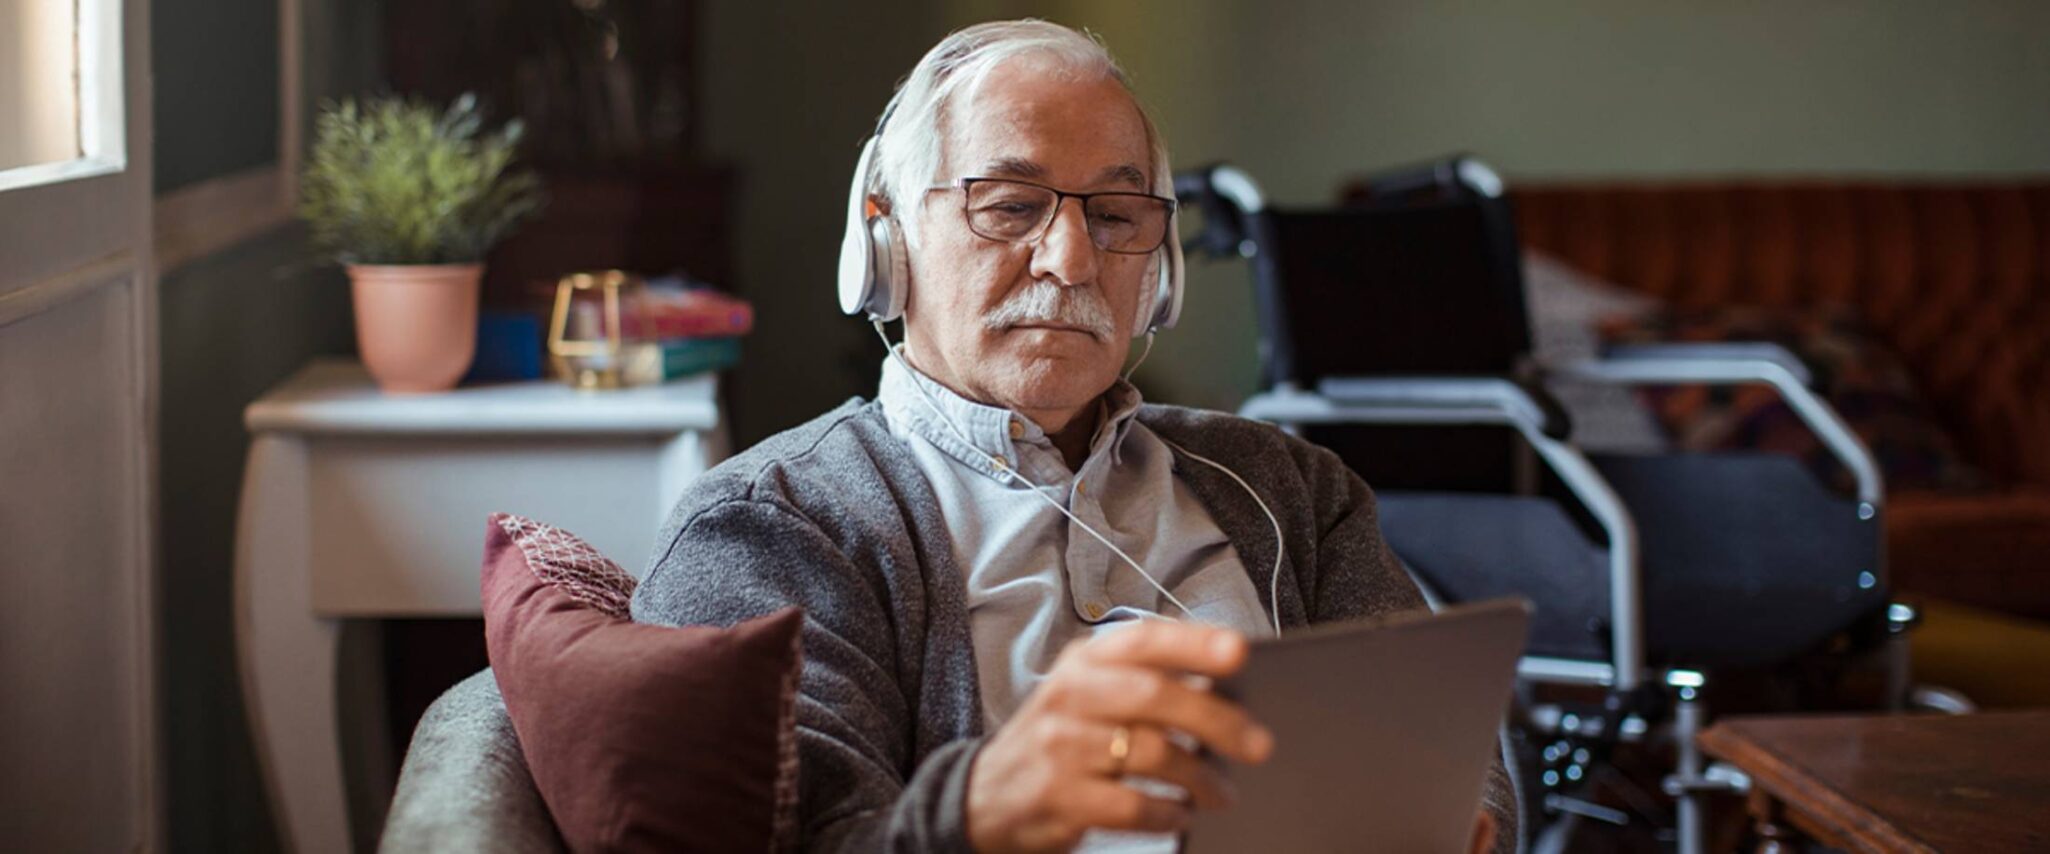 senior man listening to a podcast on his smart device